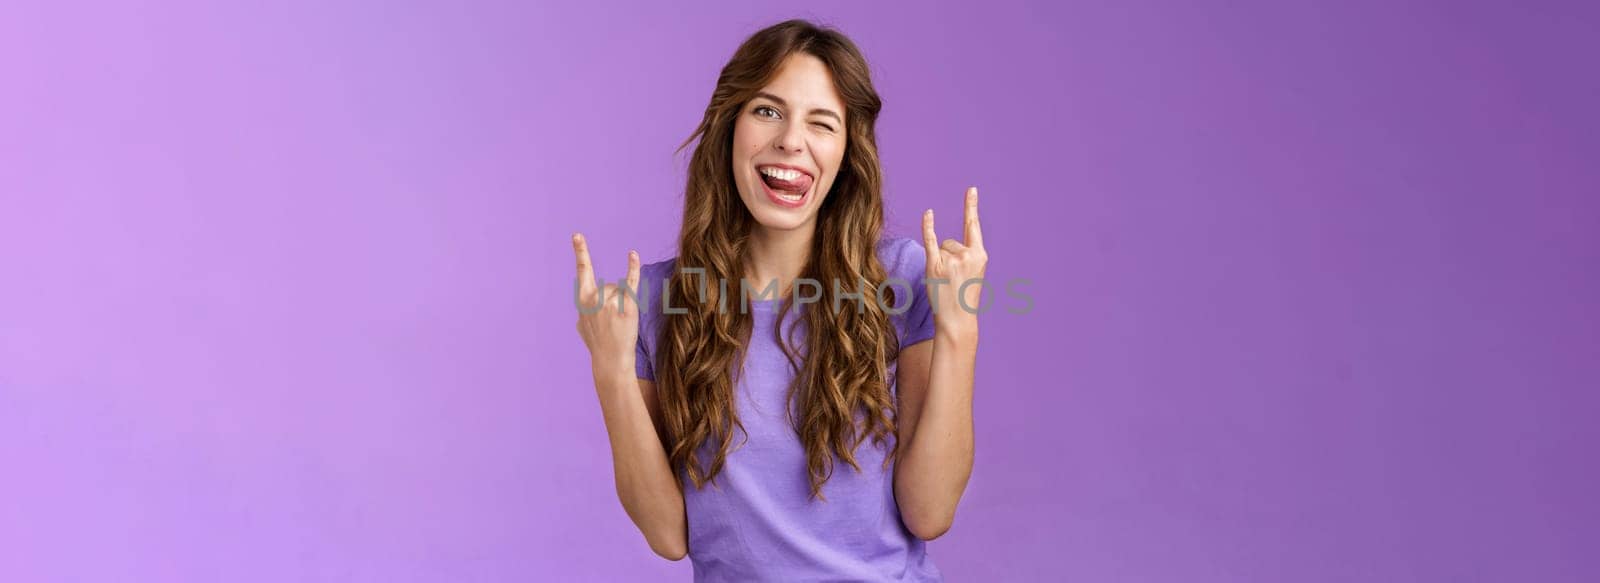 Daring sassy funny attractive woman having fun enjoy awesome party arrange music concert gathering show rock-n-roll heavy metal sign joyful stick tongue wink cheeky purple background. Lifestyle.